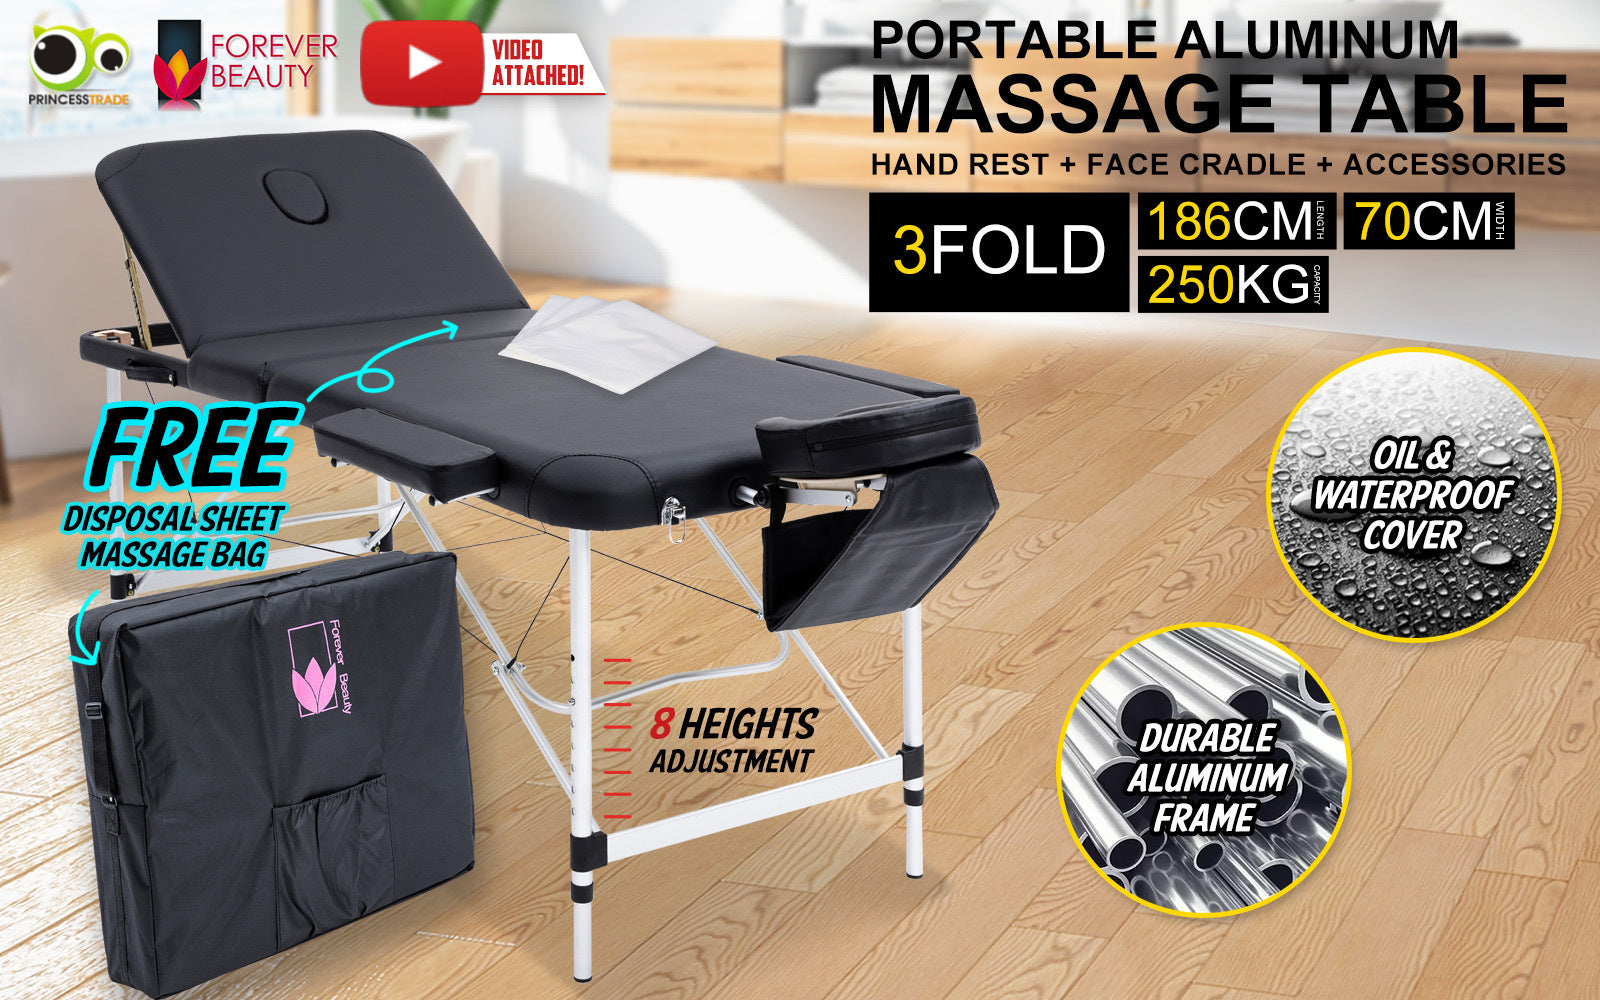 Forever Beauty Black Portable Beauty Massage Table Bed Therapy Waxing 3 Fold 70cm Aluminium - SILBERSHELL